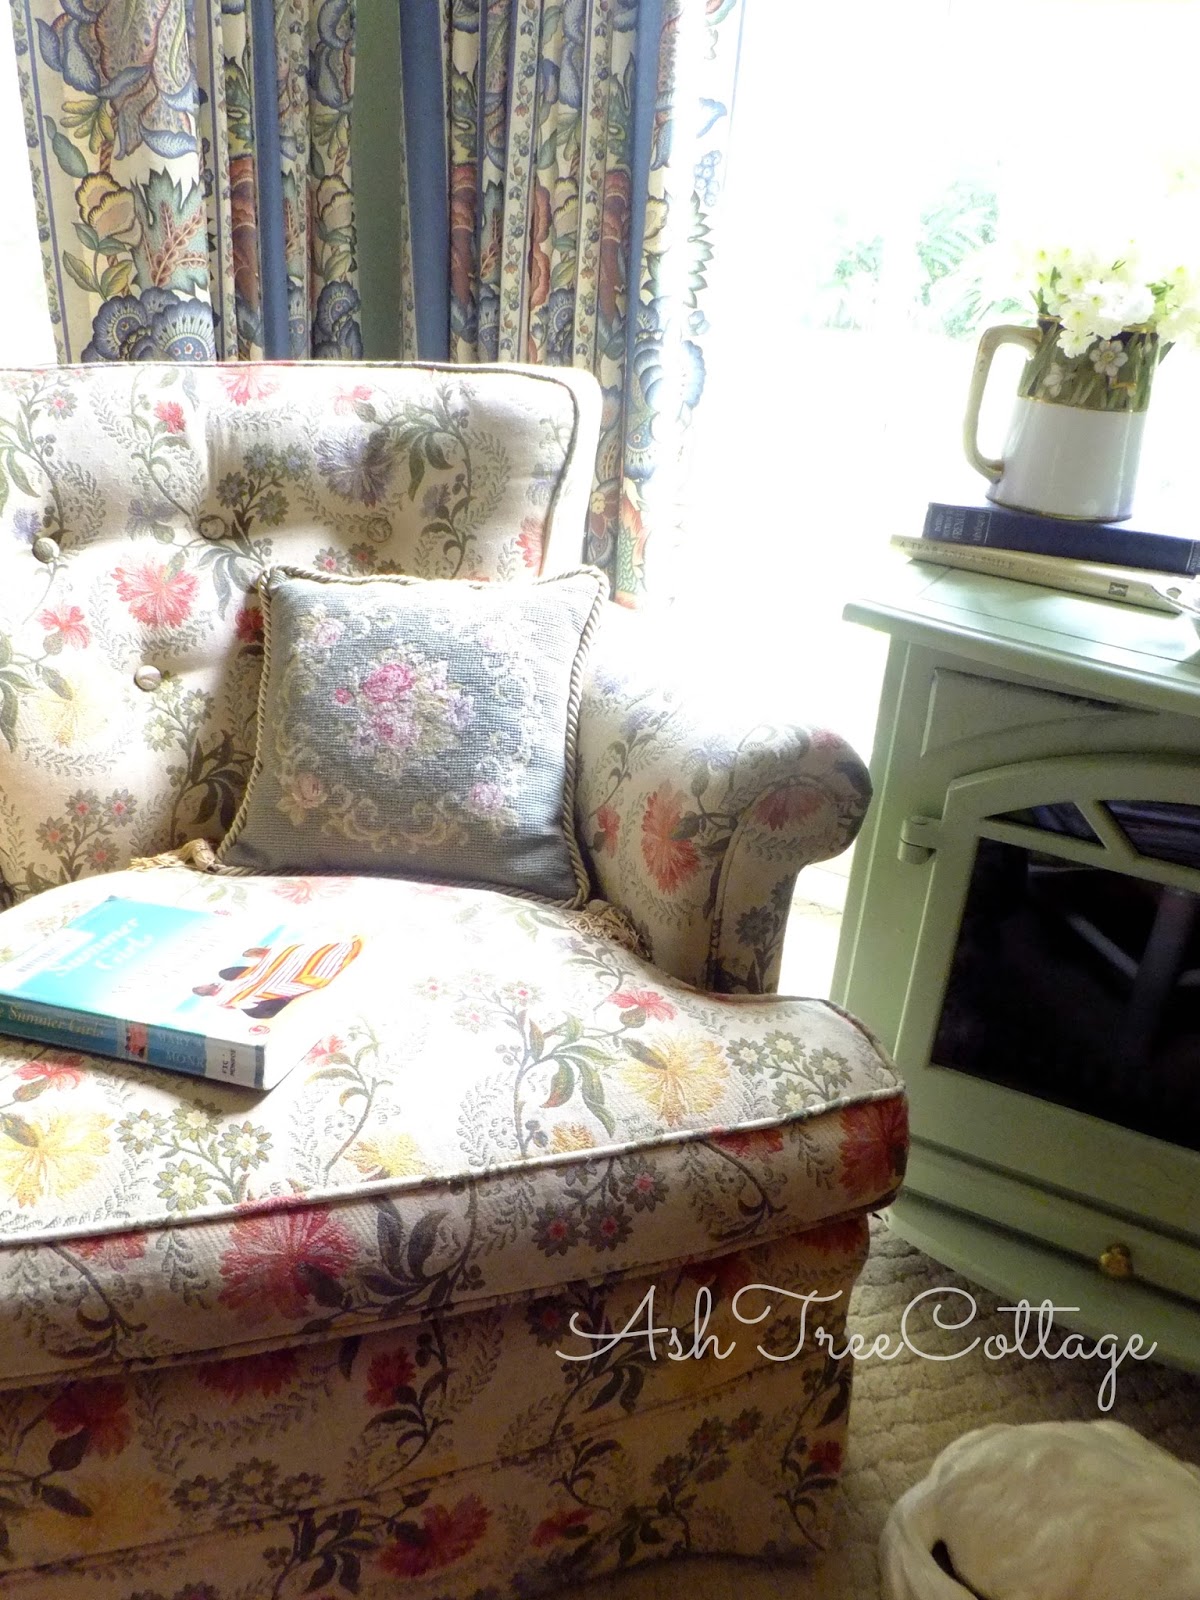 Ash Tree Cottage: Pick A Chair